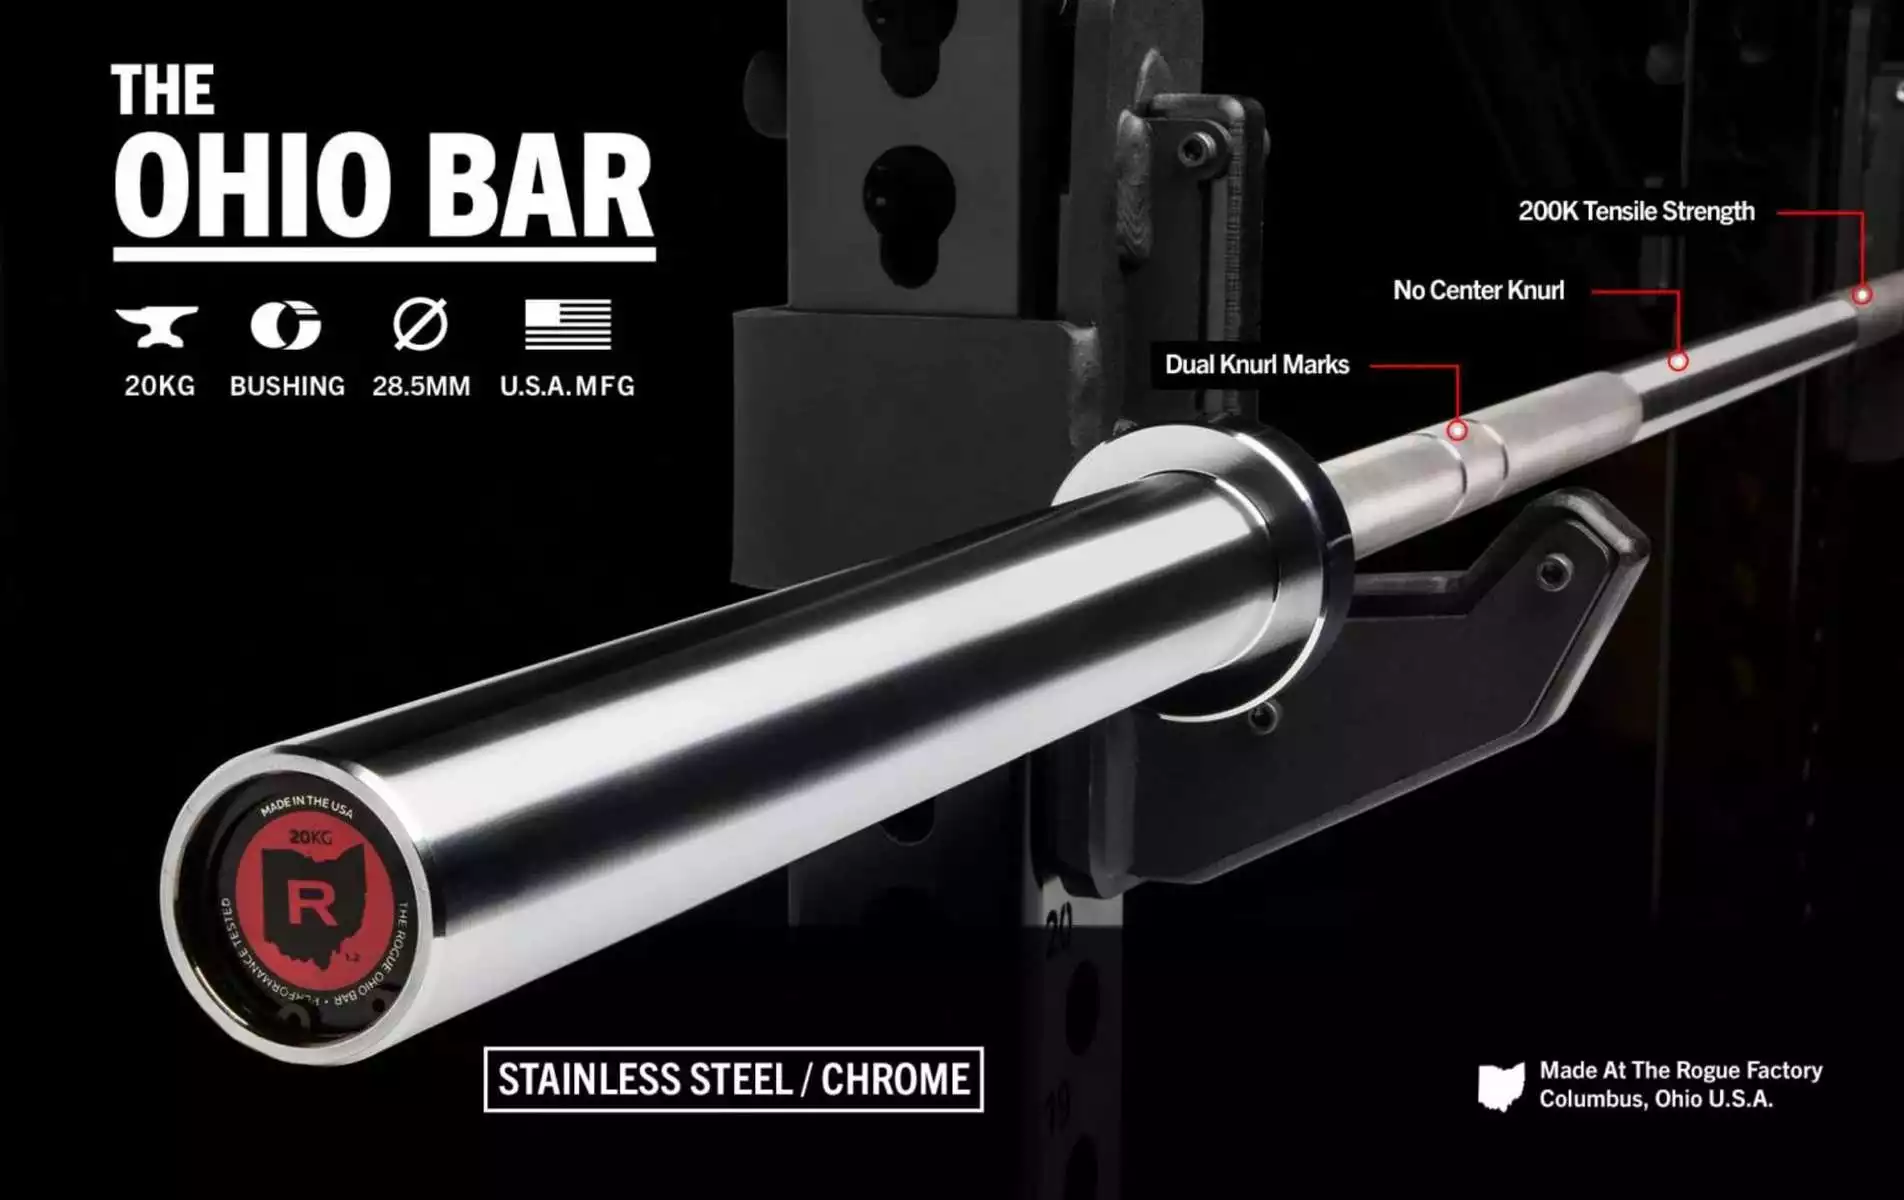 The Ohio Bar – Stainless Steel